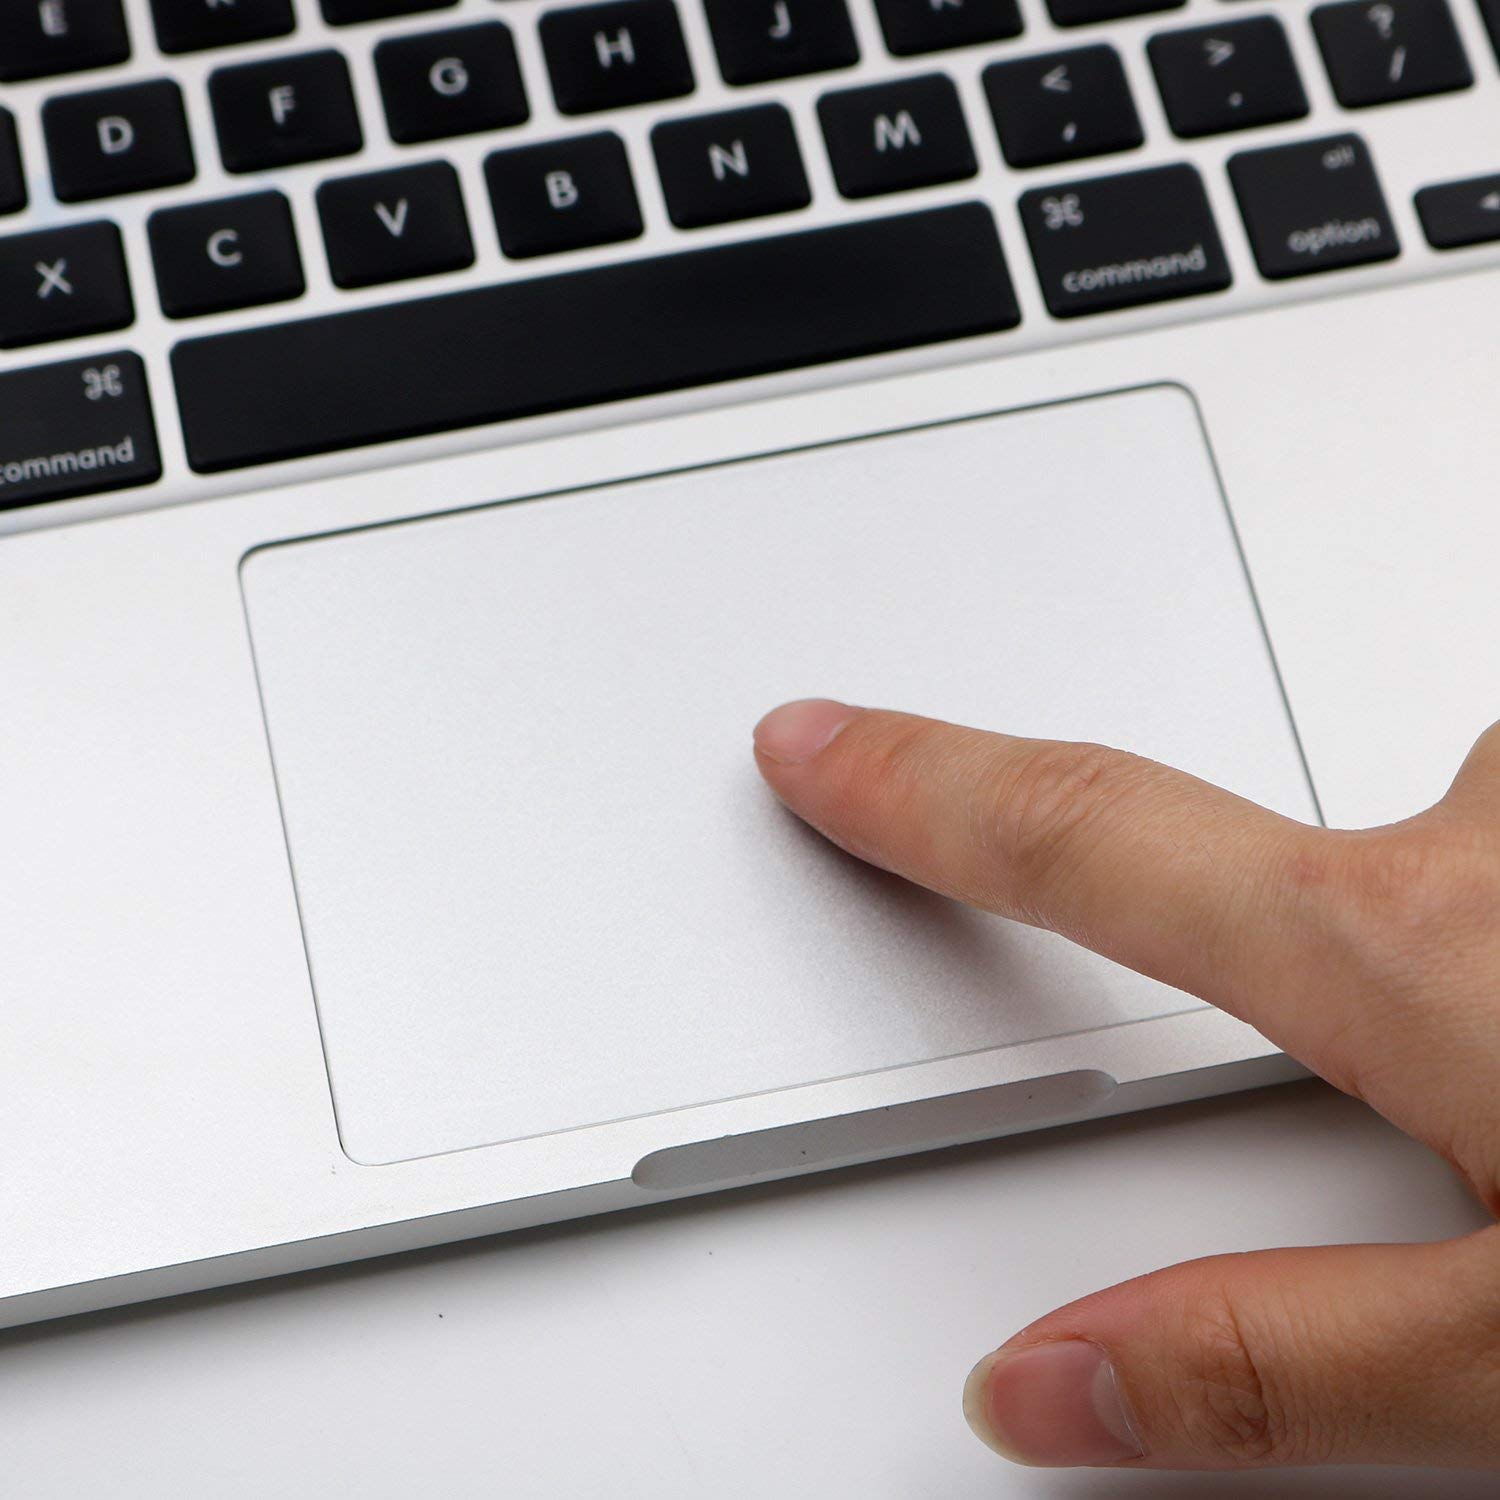 An image of a laptop touchpad icon or a finger touching a touchpad.